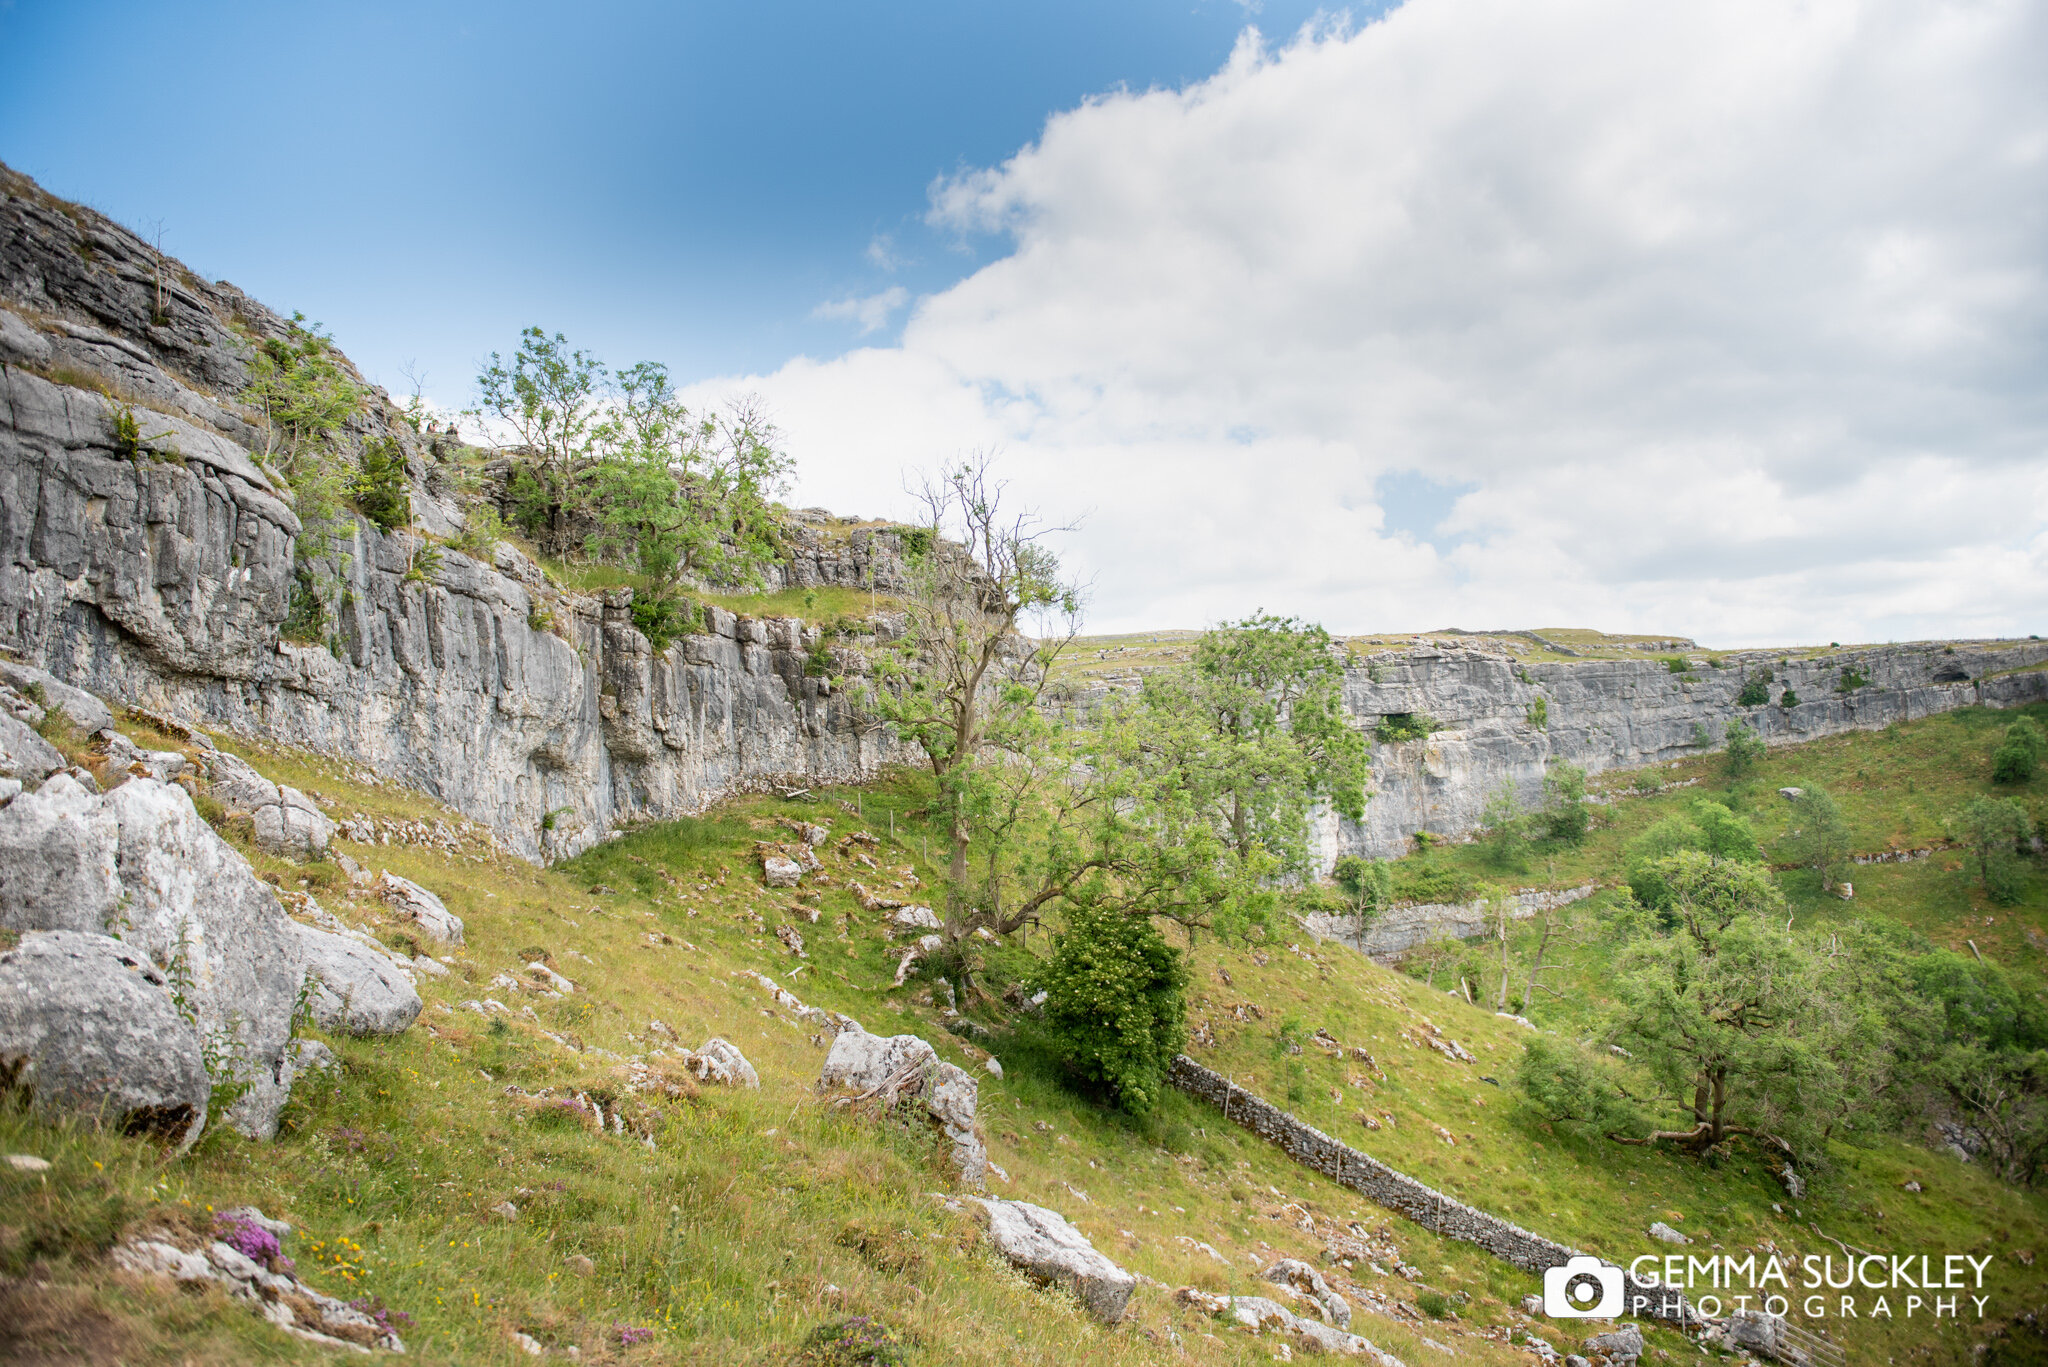 professional photo of malham cover from the steps